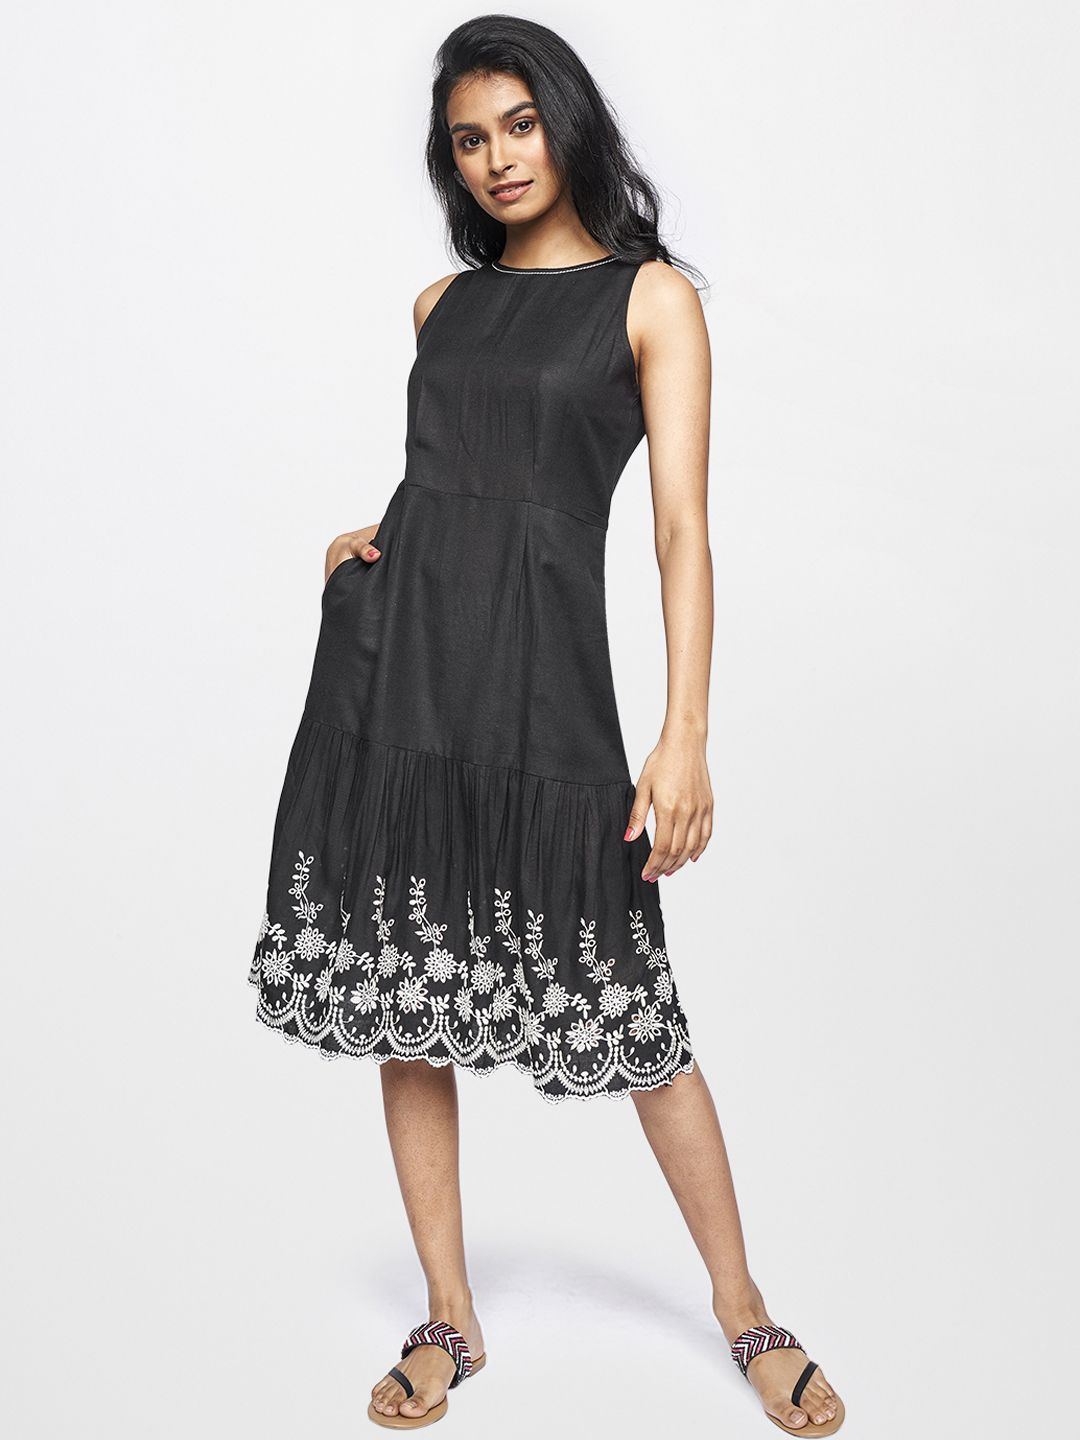 Global Desi Black & White Floral Sleeveless A-Line Casual Dress Price in India